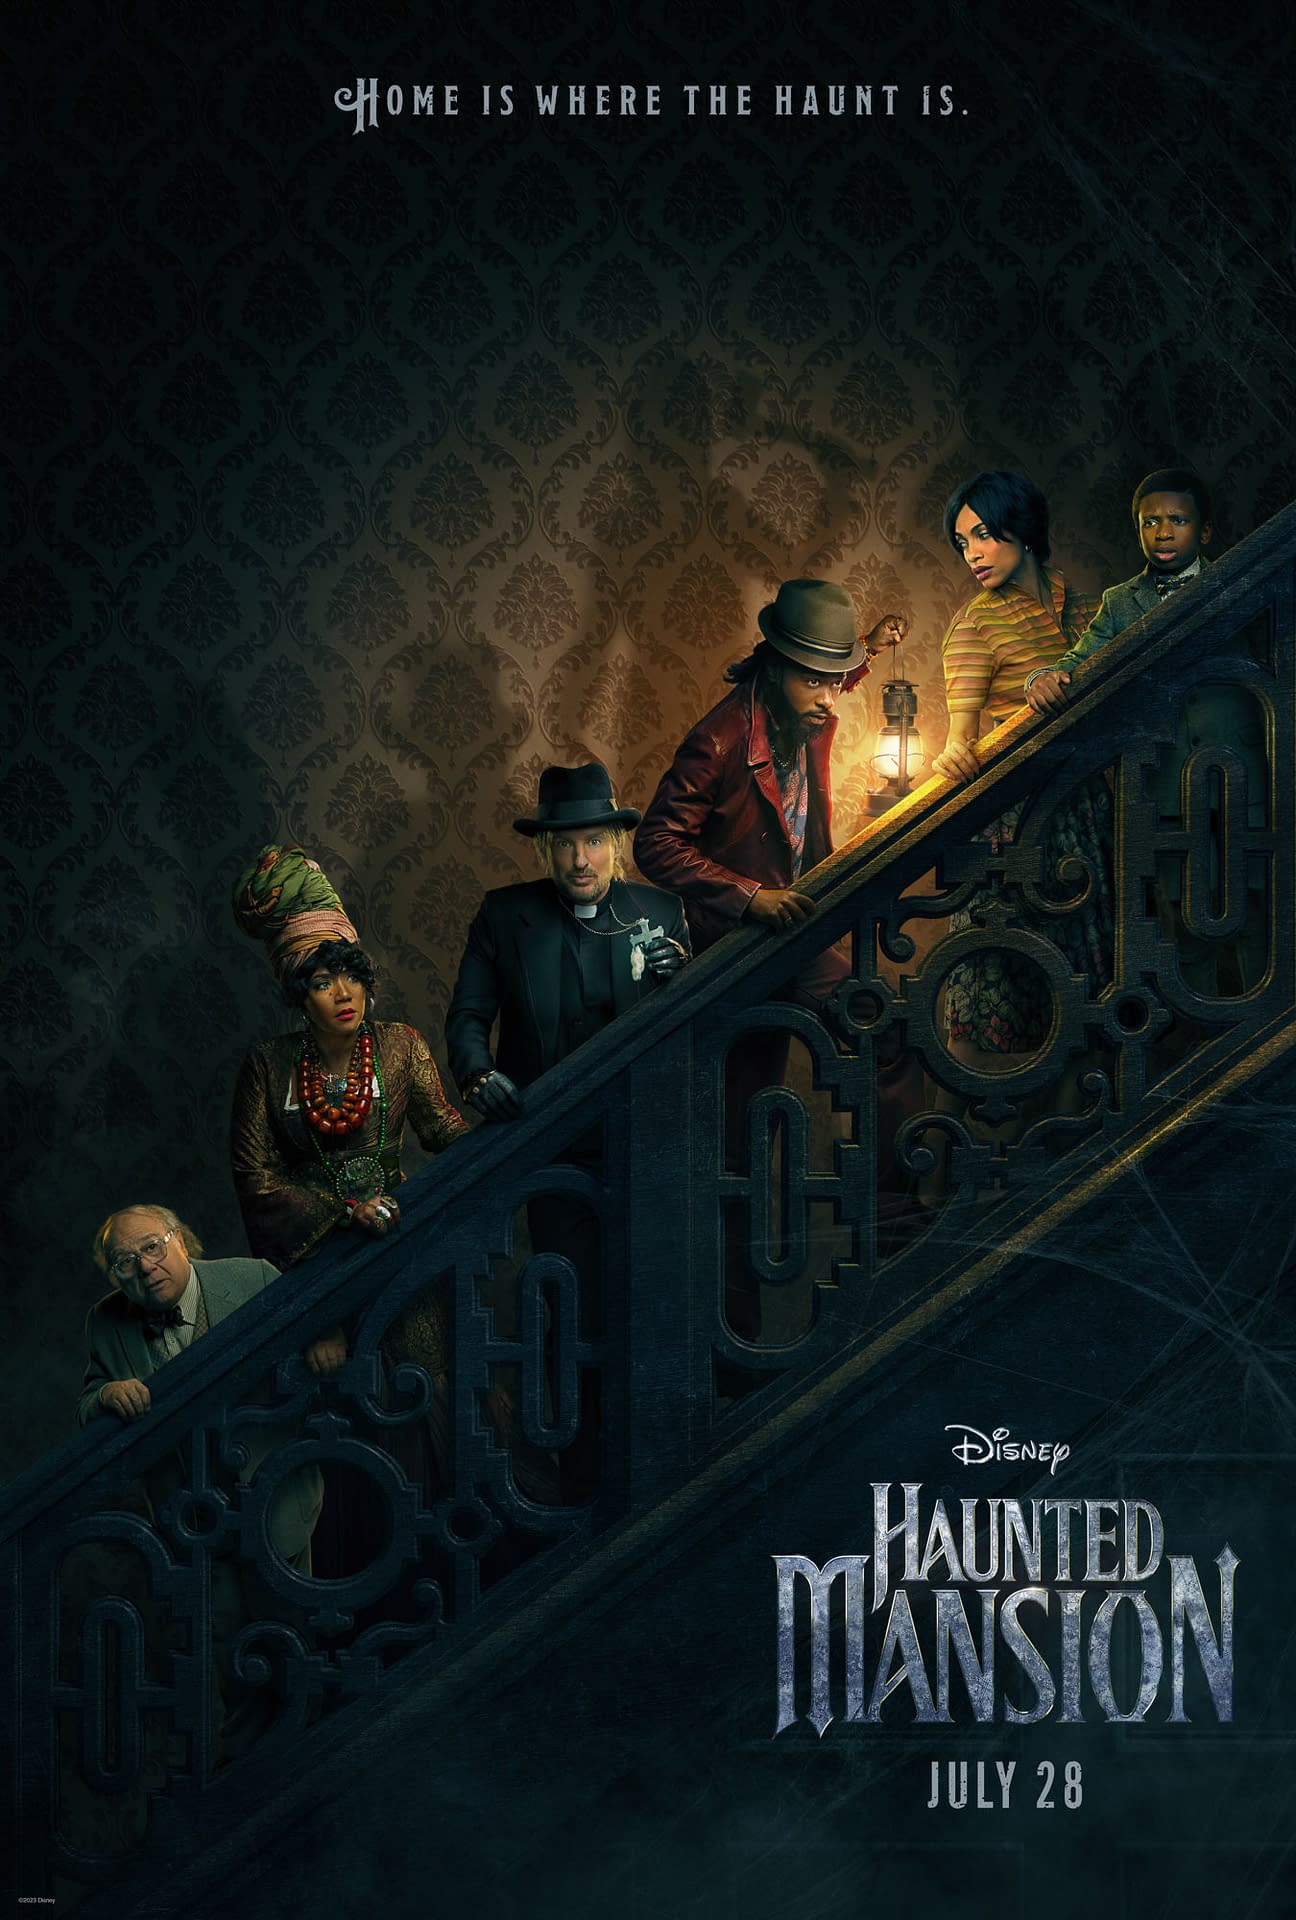 Haunted Mansion Review Just As Tonally Disjointed As The Ride